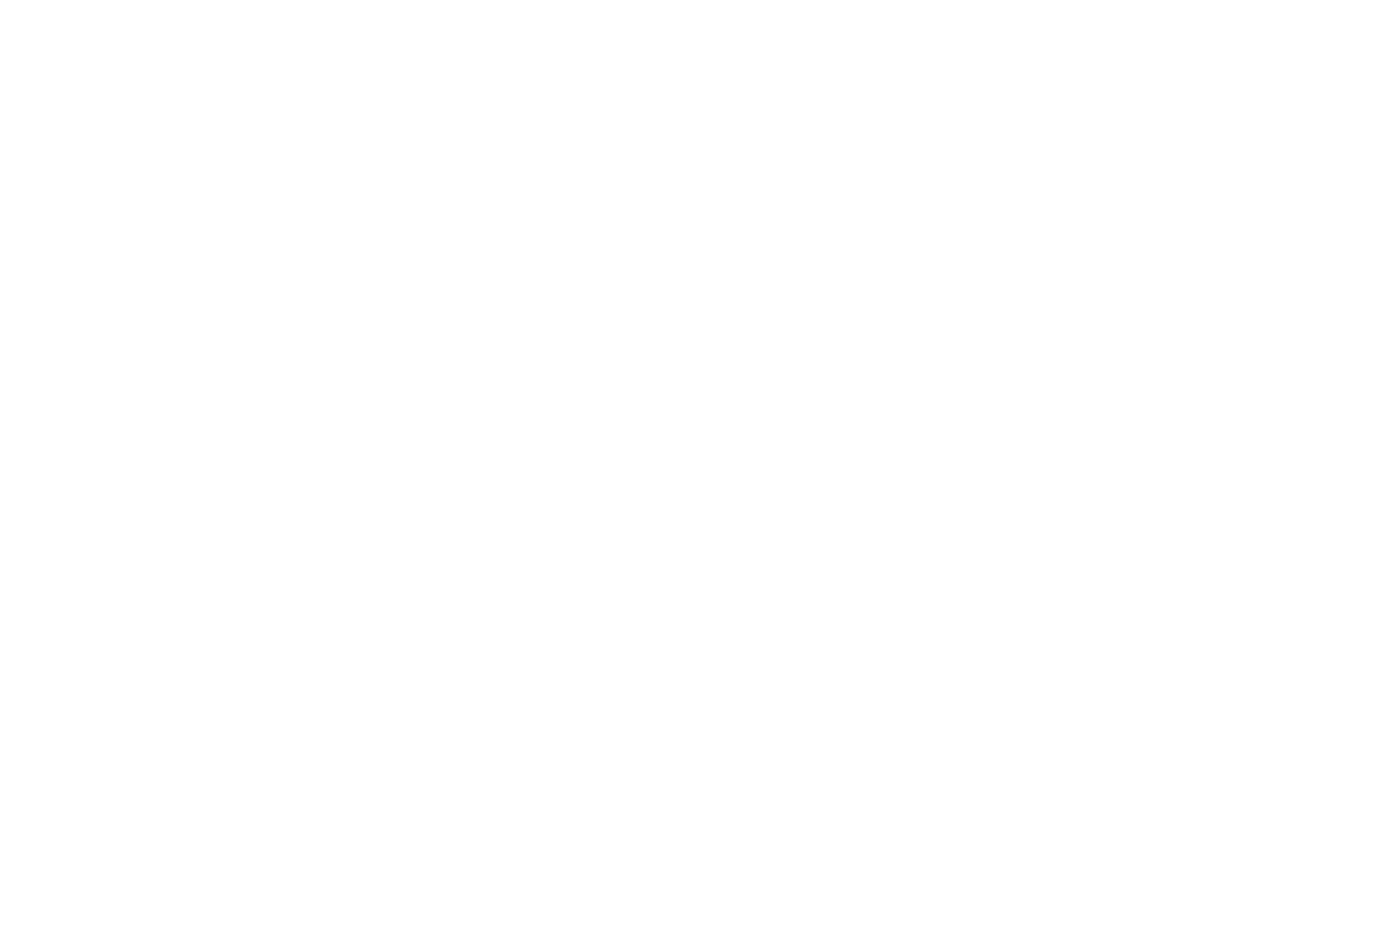 Sneaker Brand of the Year